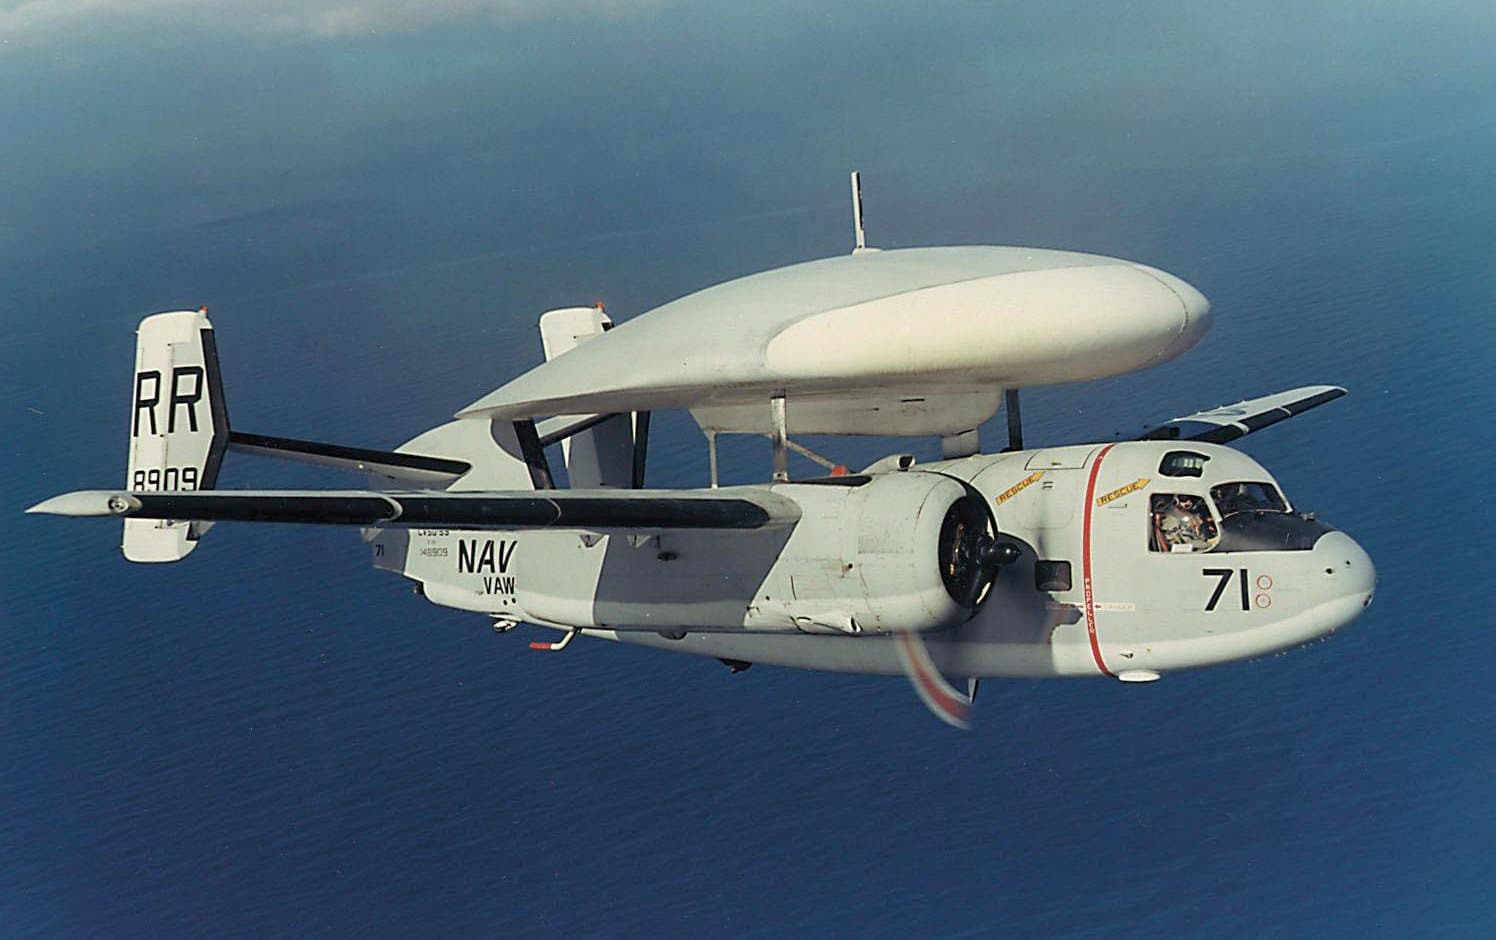 Stoof with a Roof: Grumman's Tracer Was the First of Its Kind